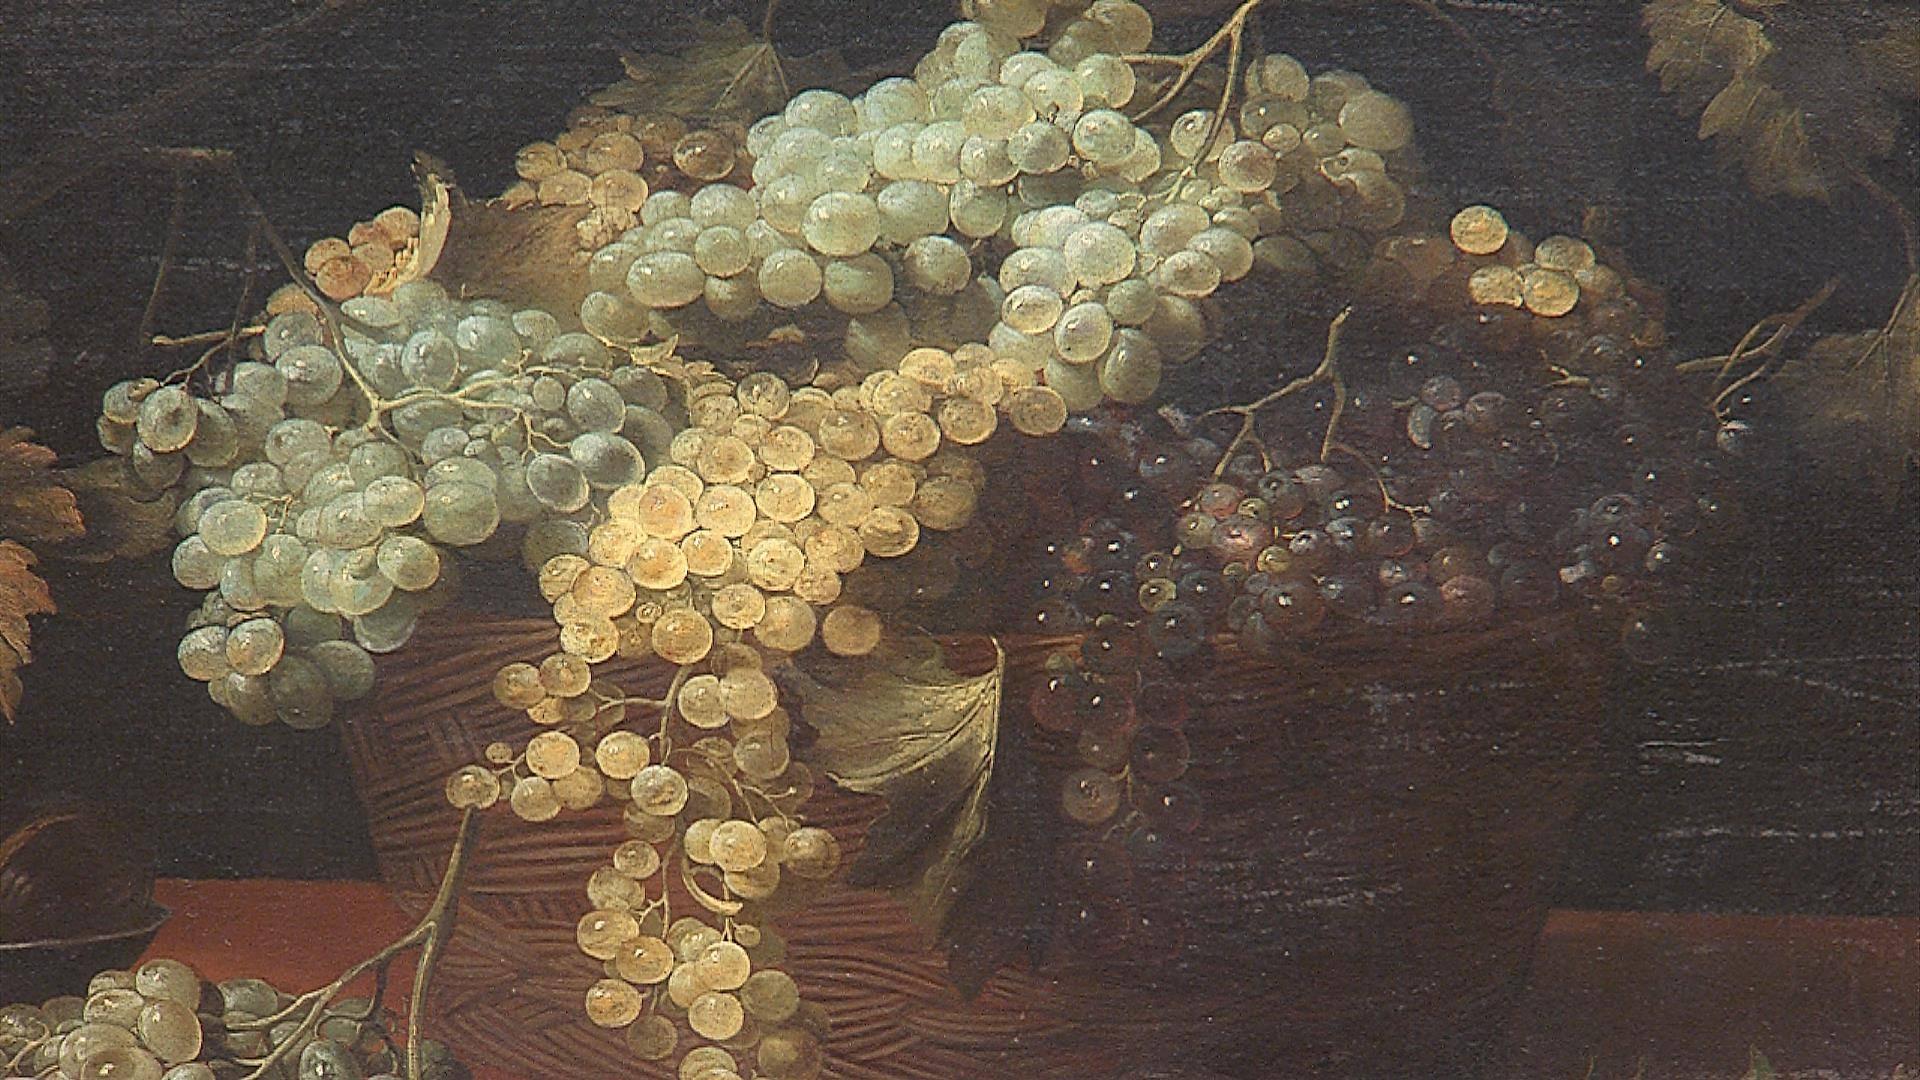 Still life oil on canvas depicting a wicker basket with peaches and grapes.

Ruoppolo's style favours darker backgrounds, similar to Caravaggio's still life paintings and display his peculiar ability to infuse his works with an almost rhythmic